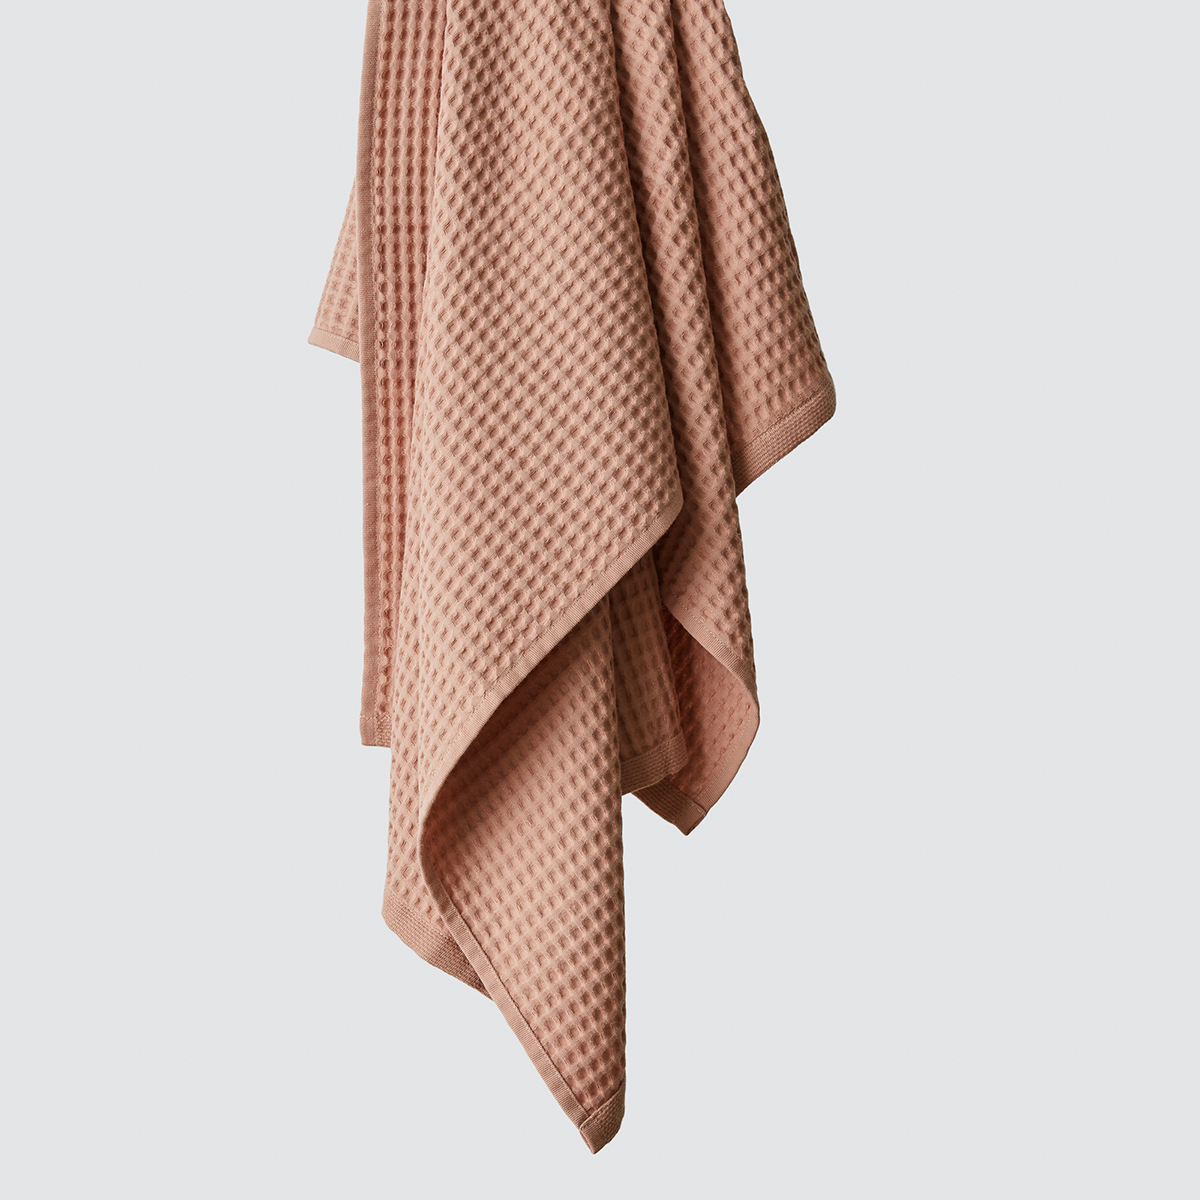 The Citizenry Mara Organic Waffle Bath Towels | The Container Store